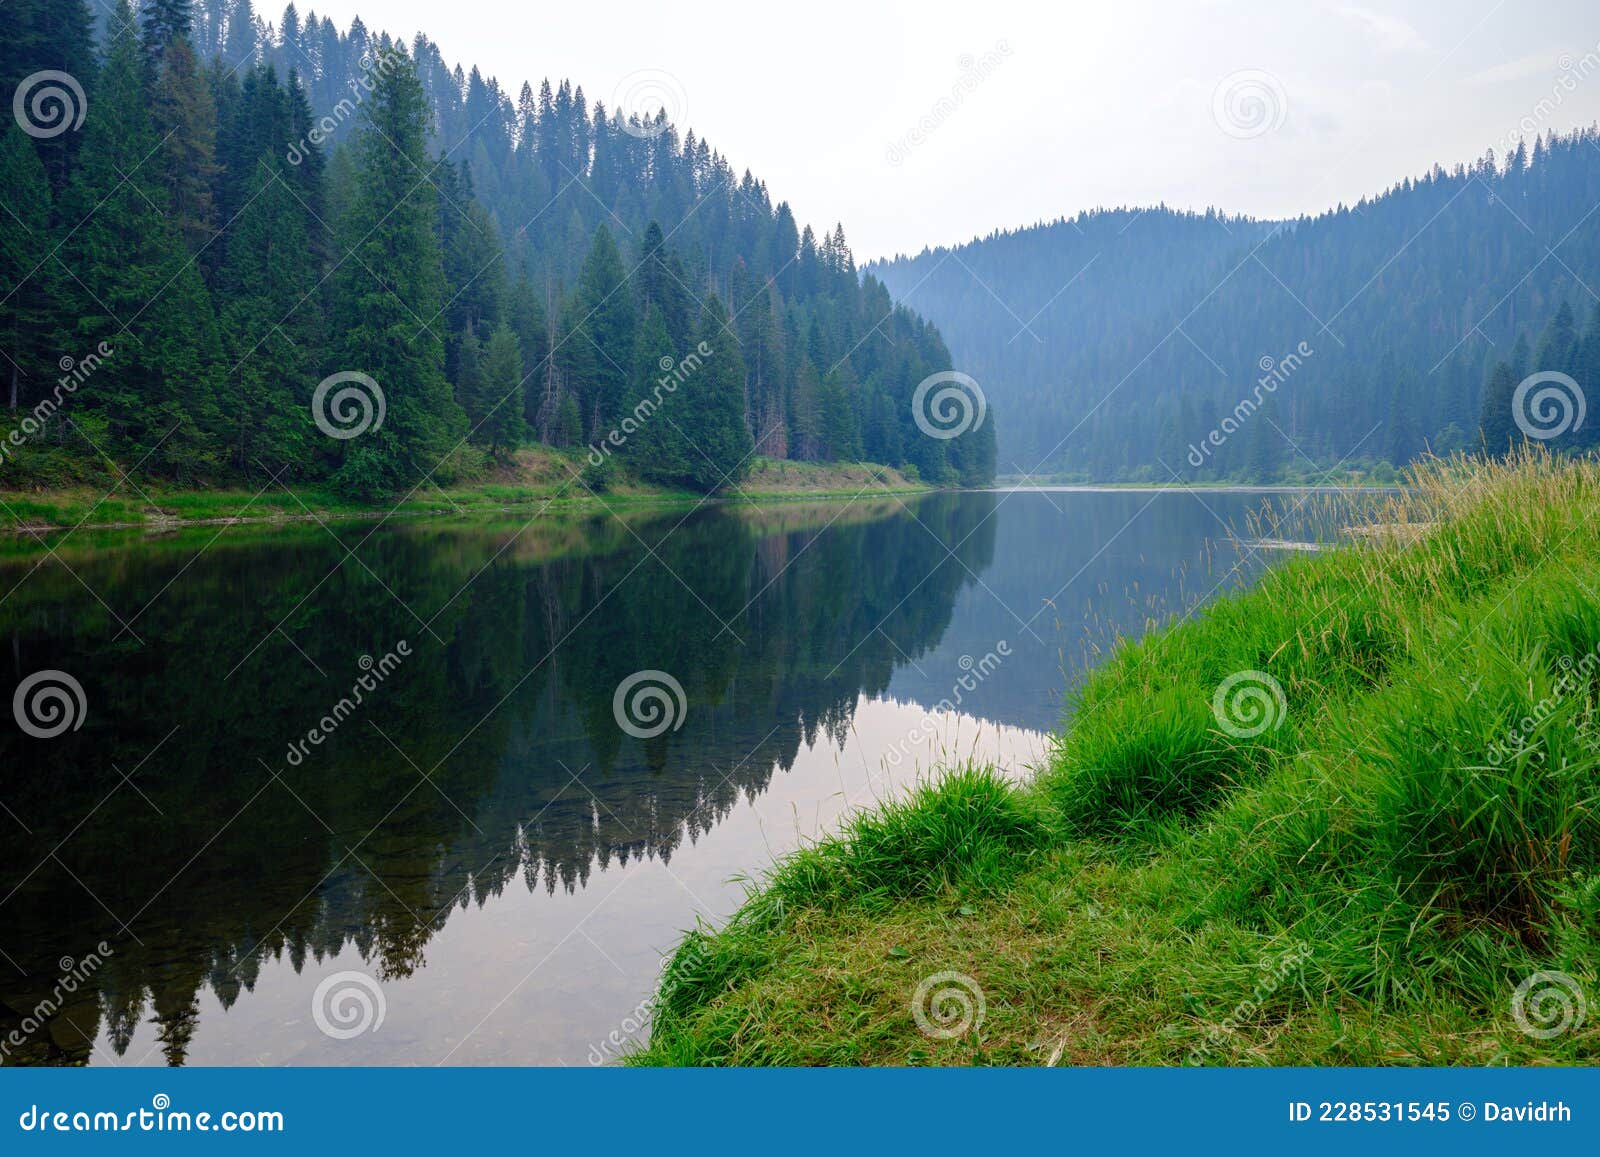 the forest reflected in the lochsa river near syringa, idaho, usa